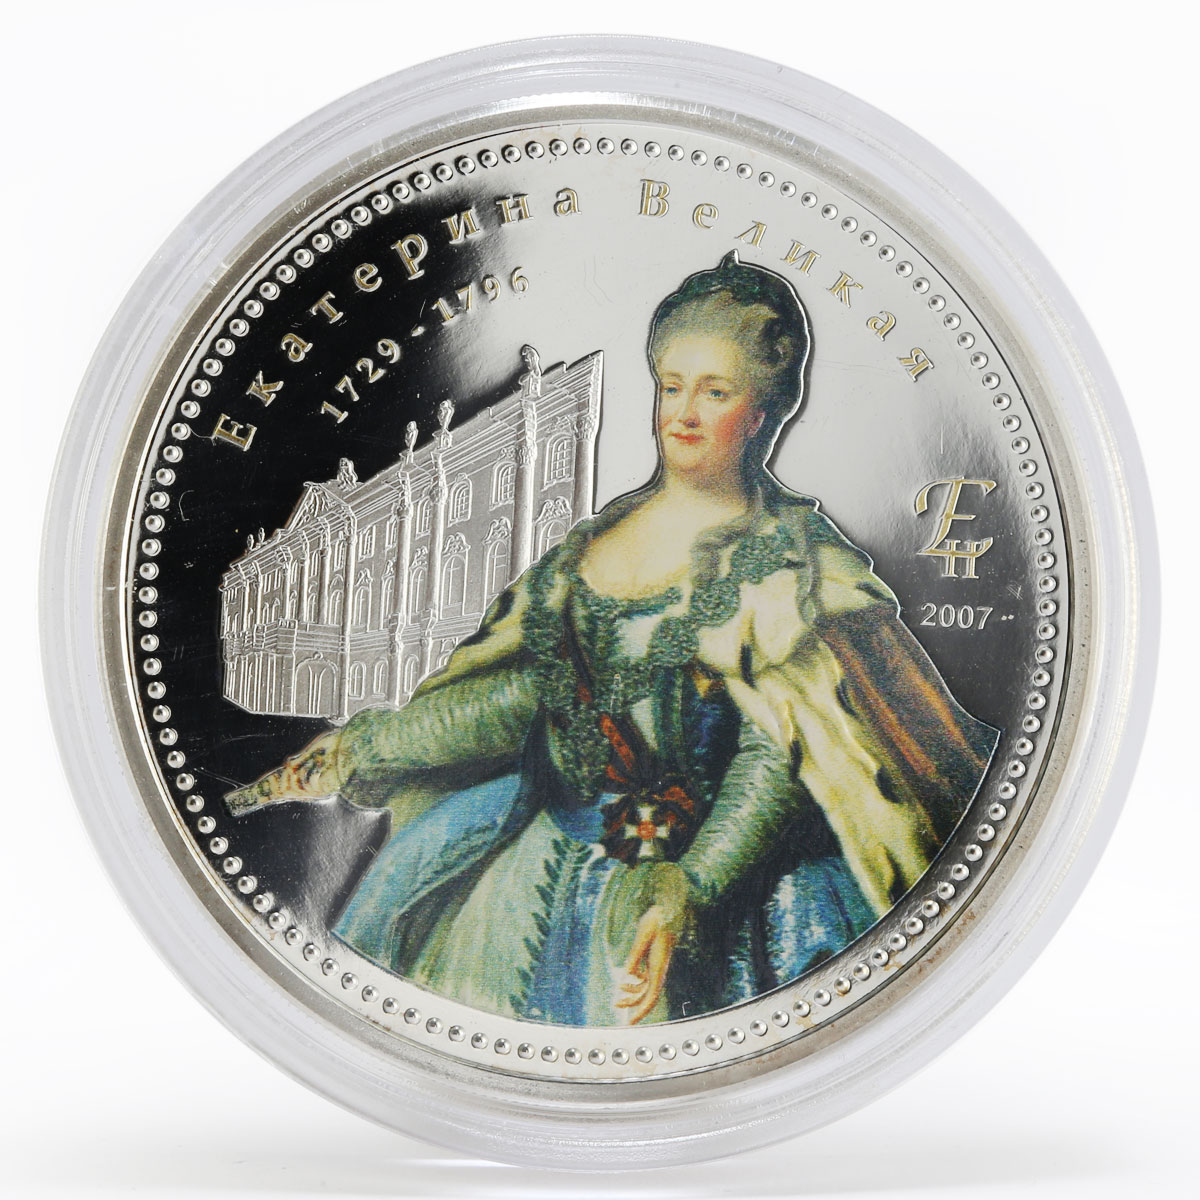 Mongolia 1000 togrog Russian rulers Catherine II Great colored silver coin 2007